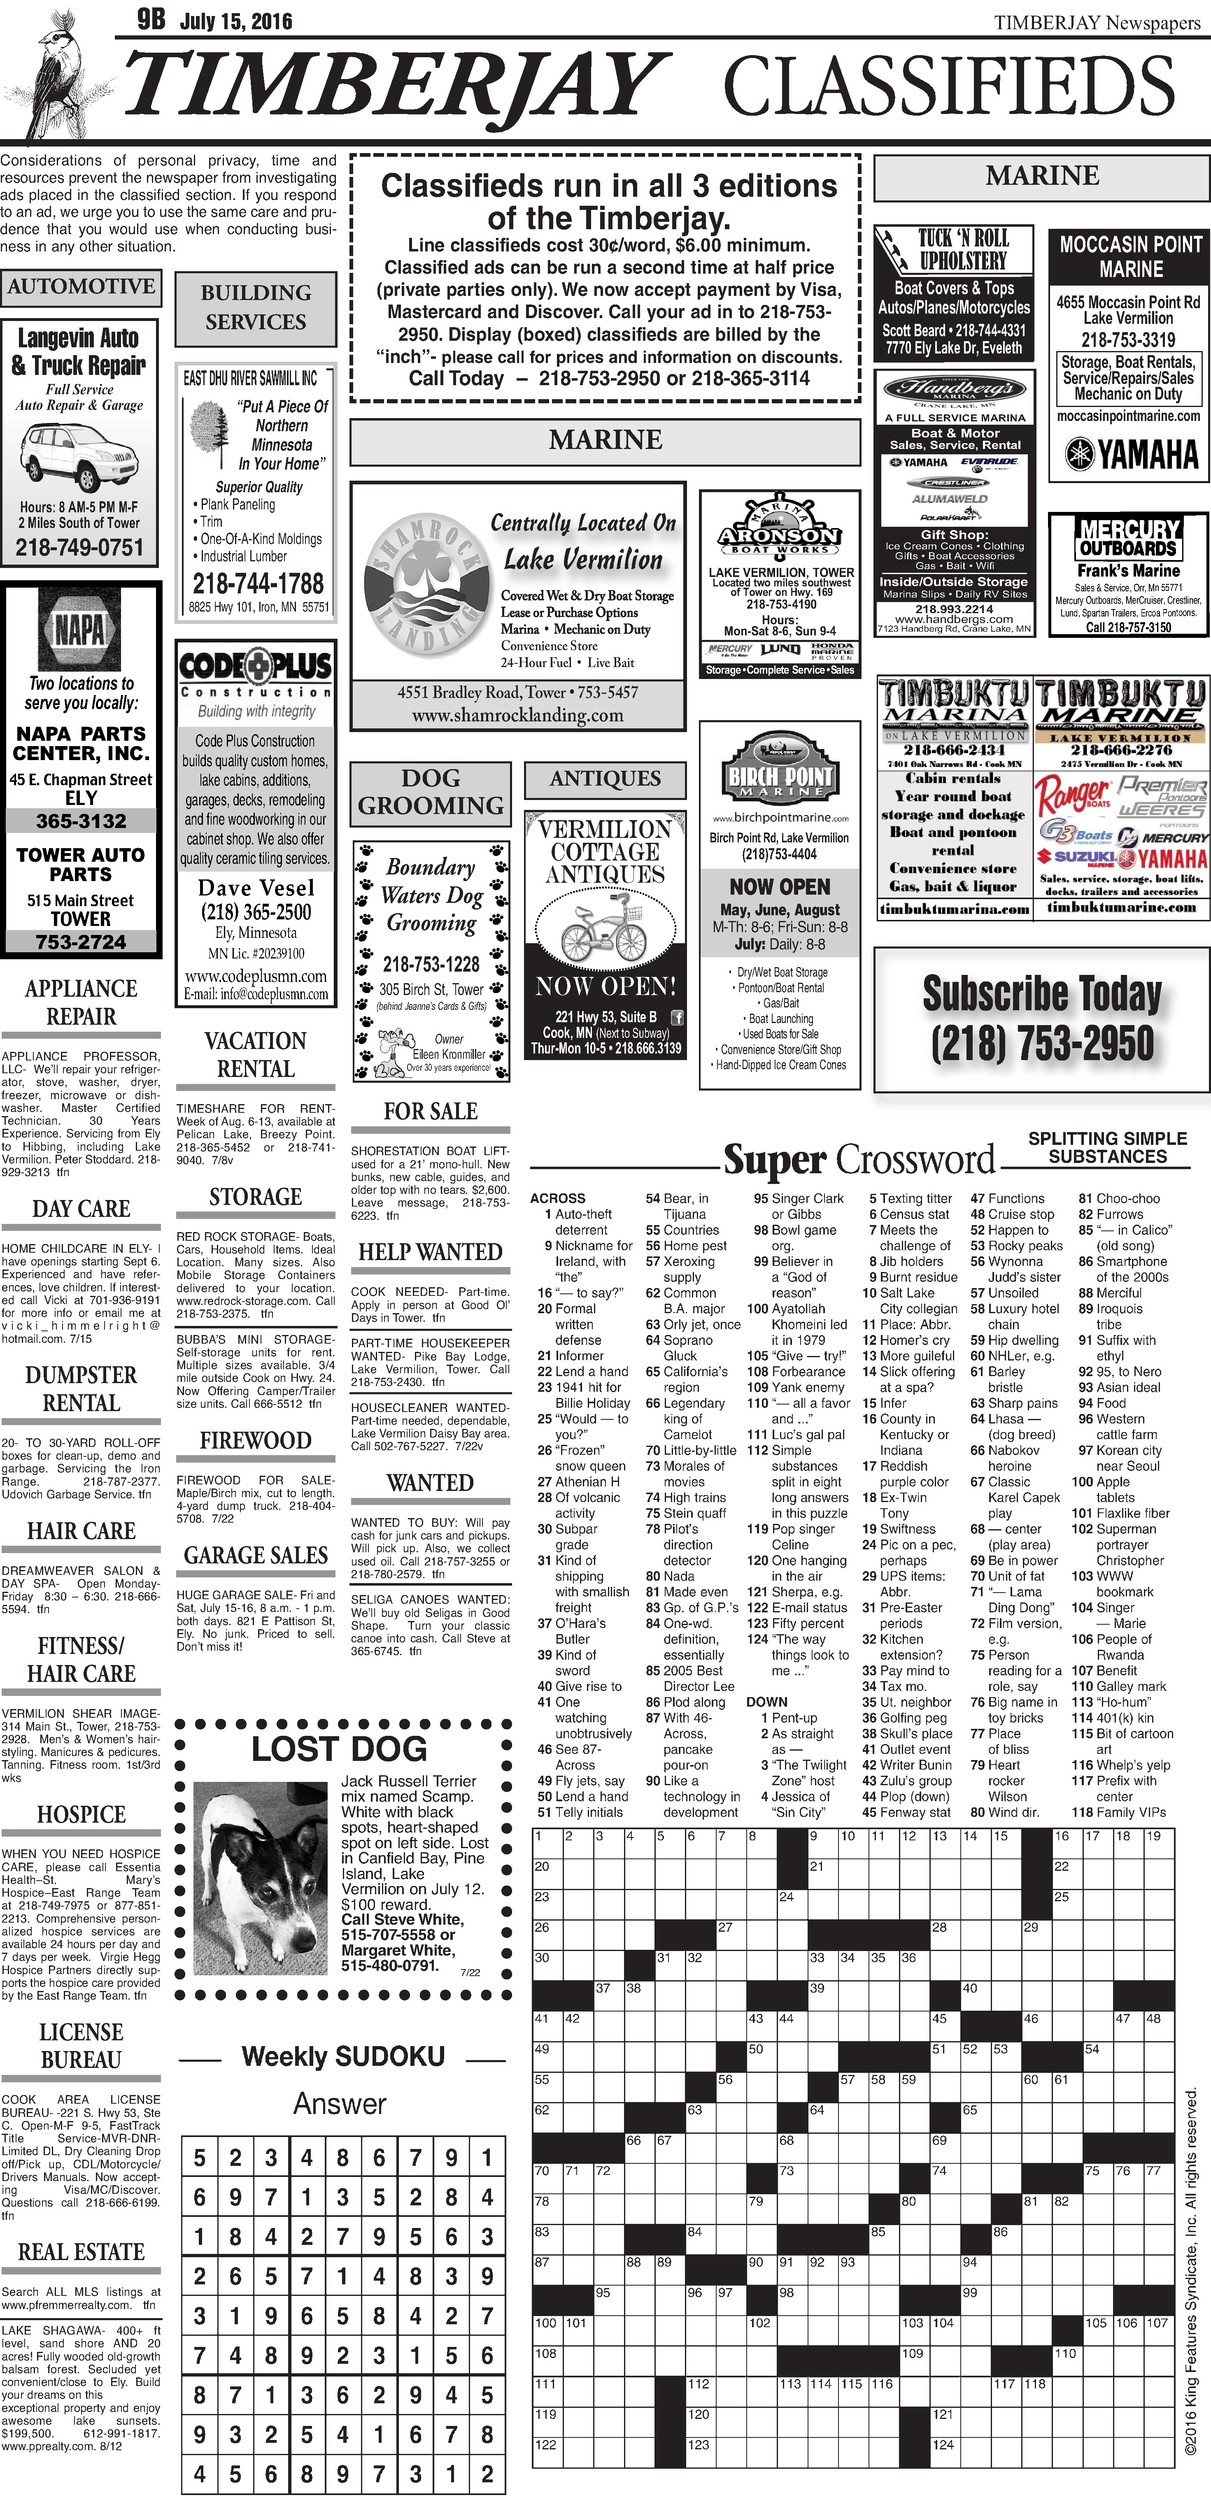 Click here to download the legal notices and classifieds from page B9